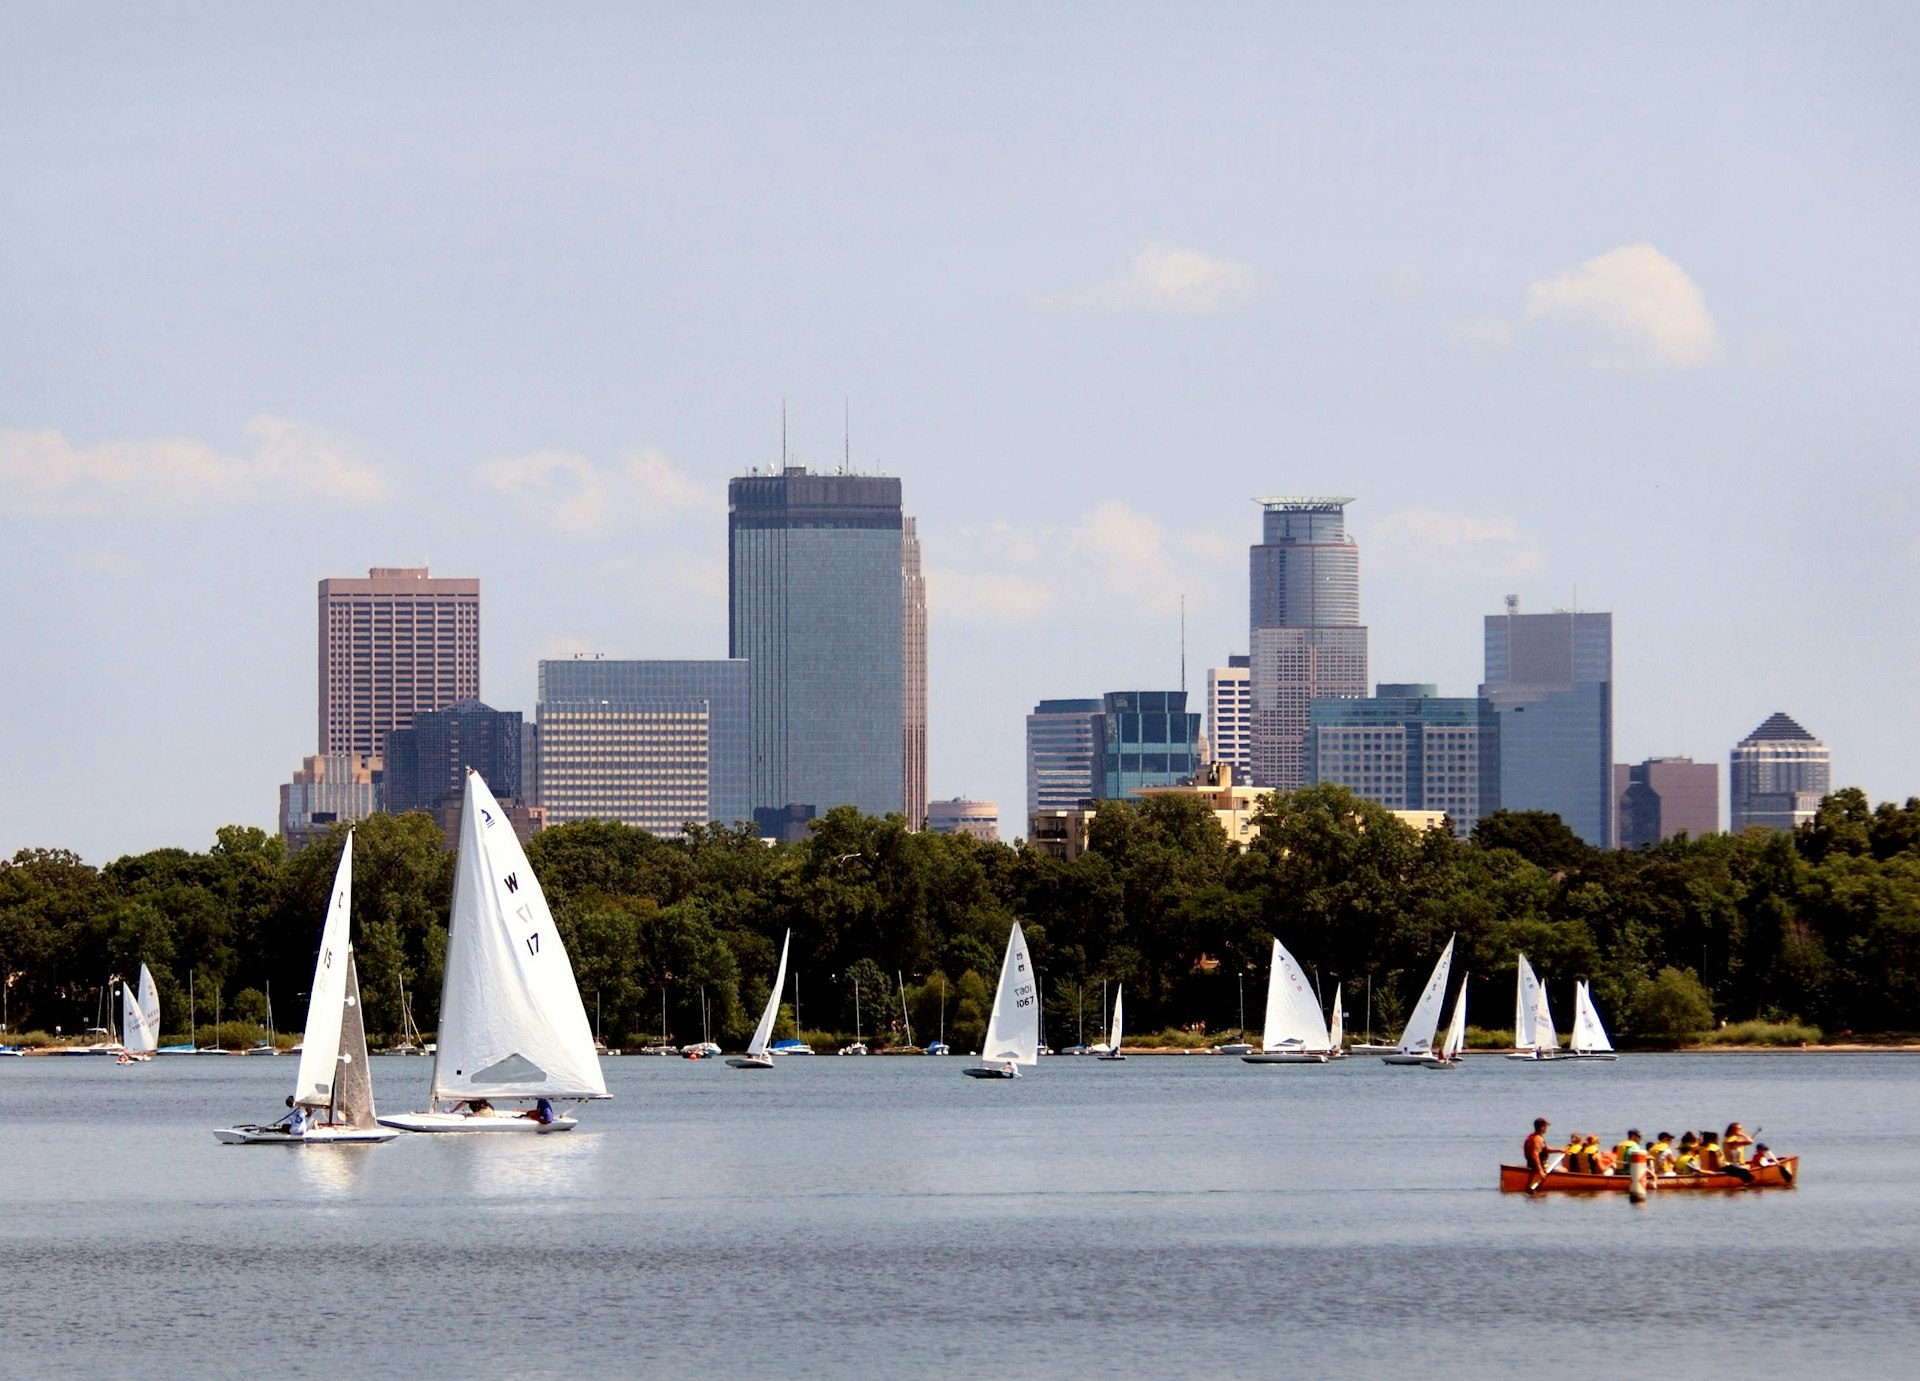 Sailboats with white sails on a lake at the edge of a city. There are several tall buildings in the background